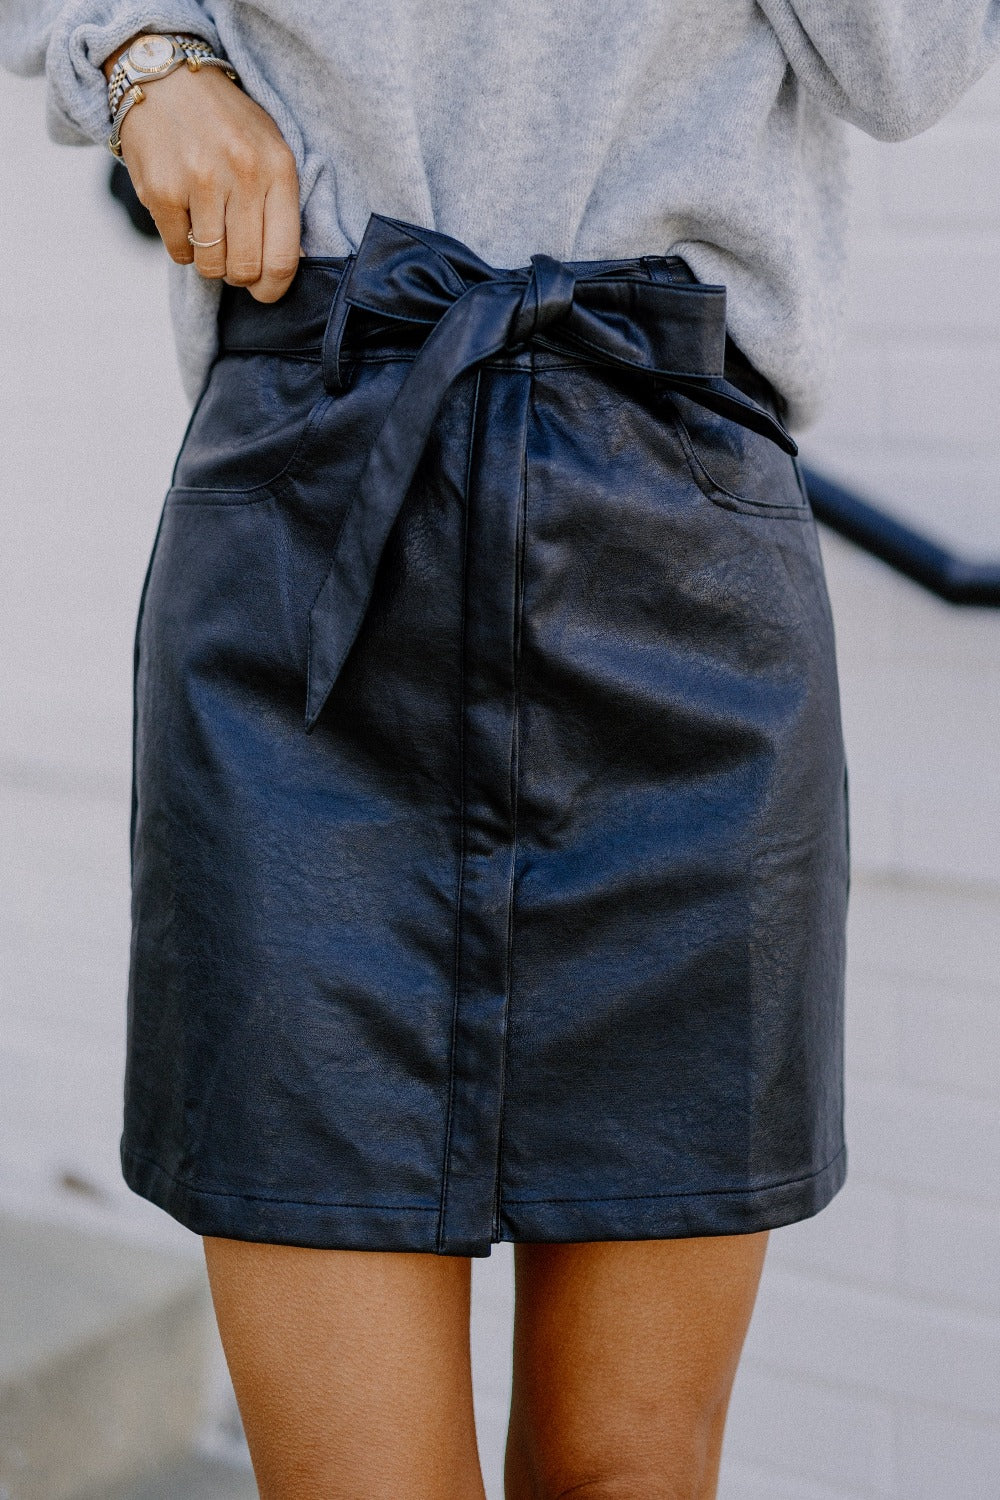 Ava Leather Skirt in Black (Sizes XS-L)